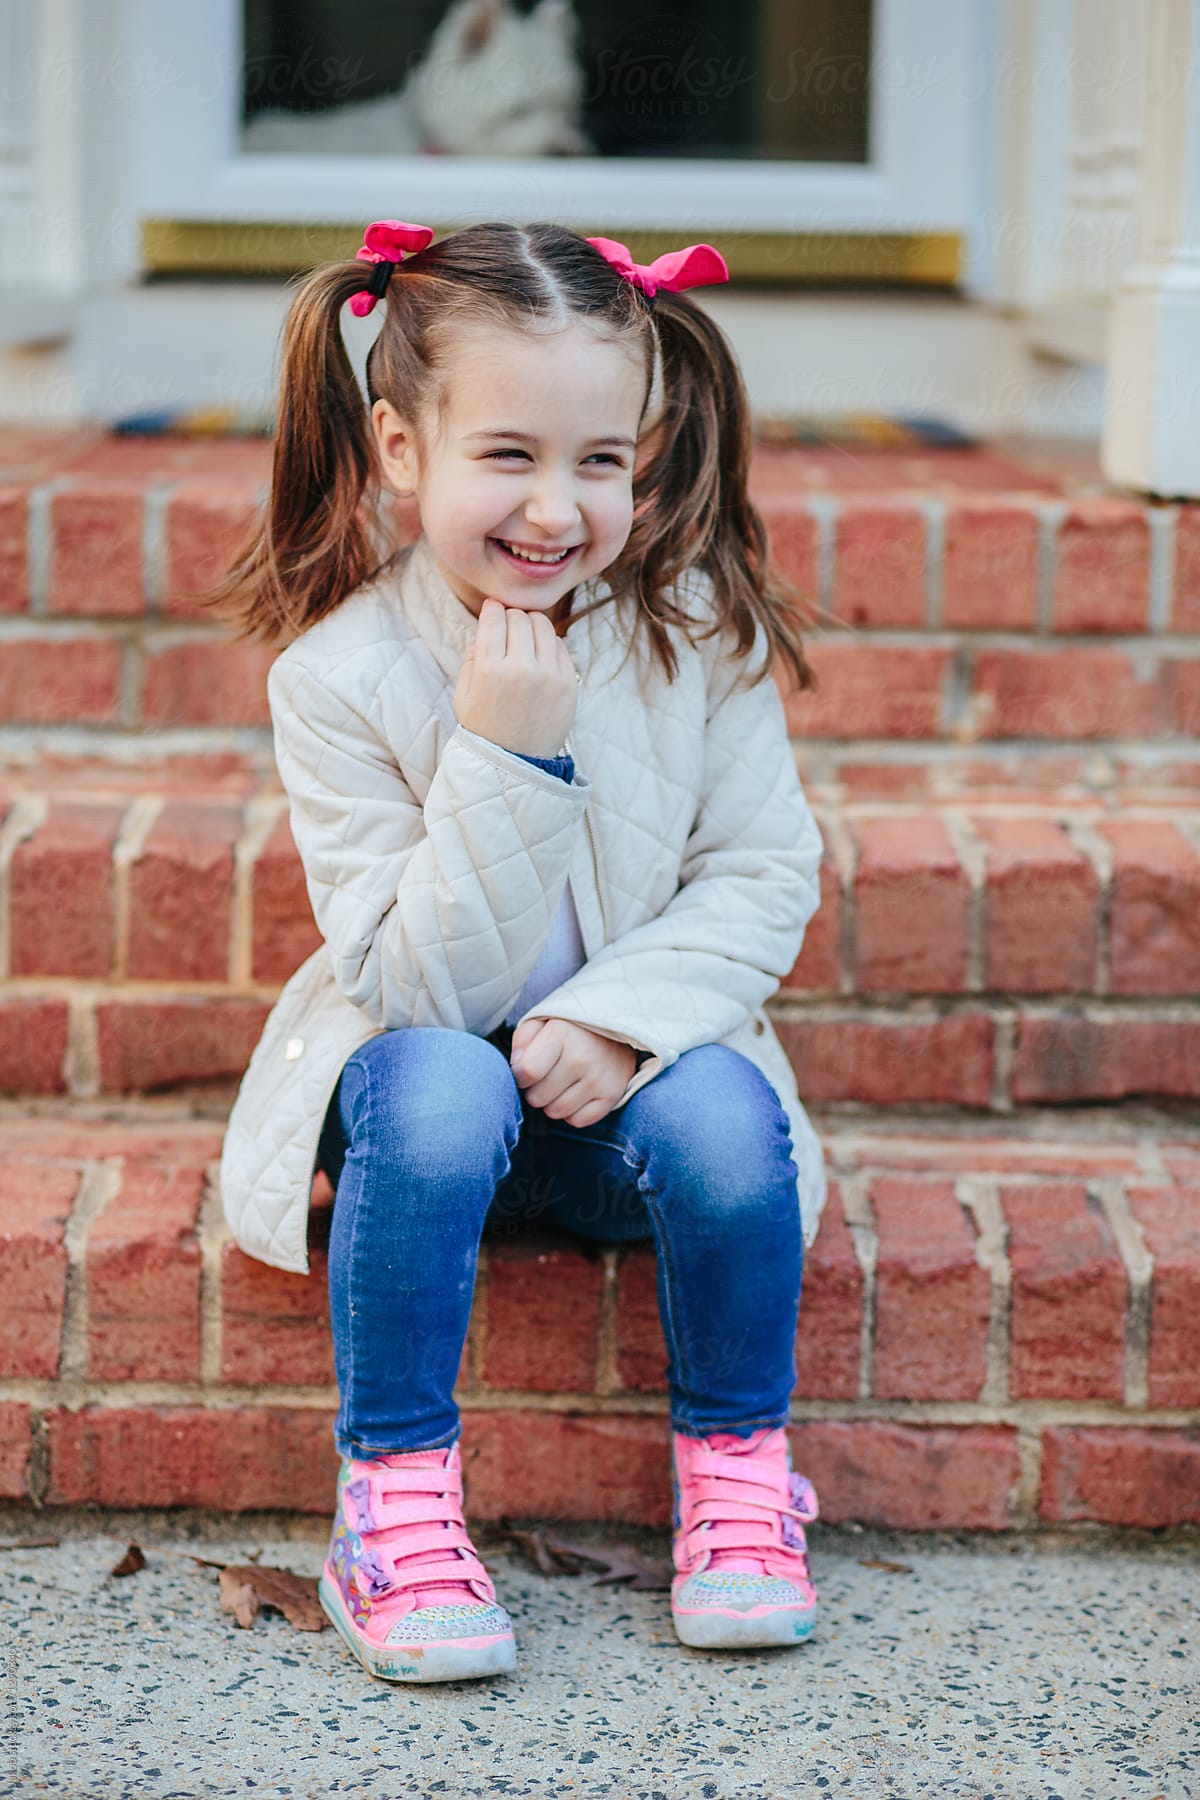 Cute Young Girl Laughing By Stocksy Contributor Jakob Lagerstedt Stocksy 